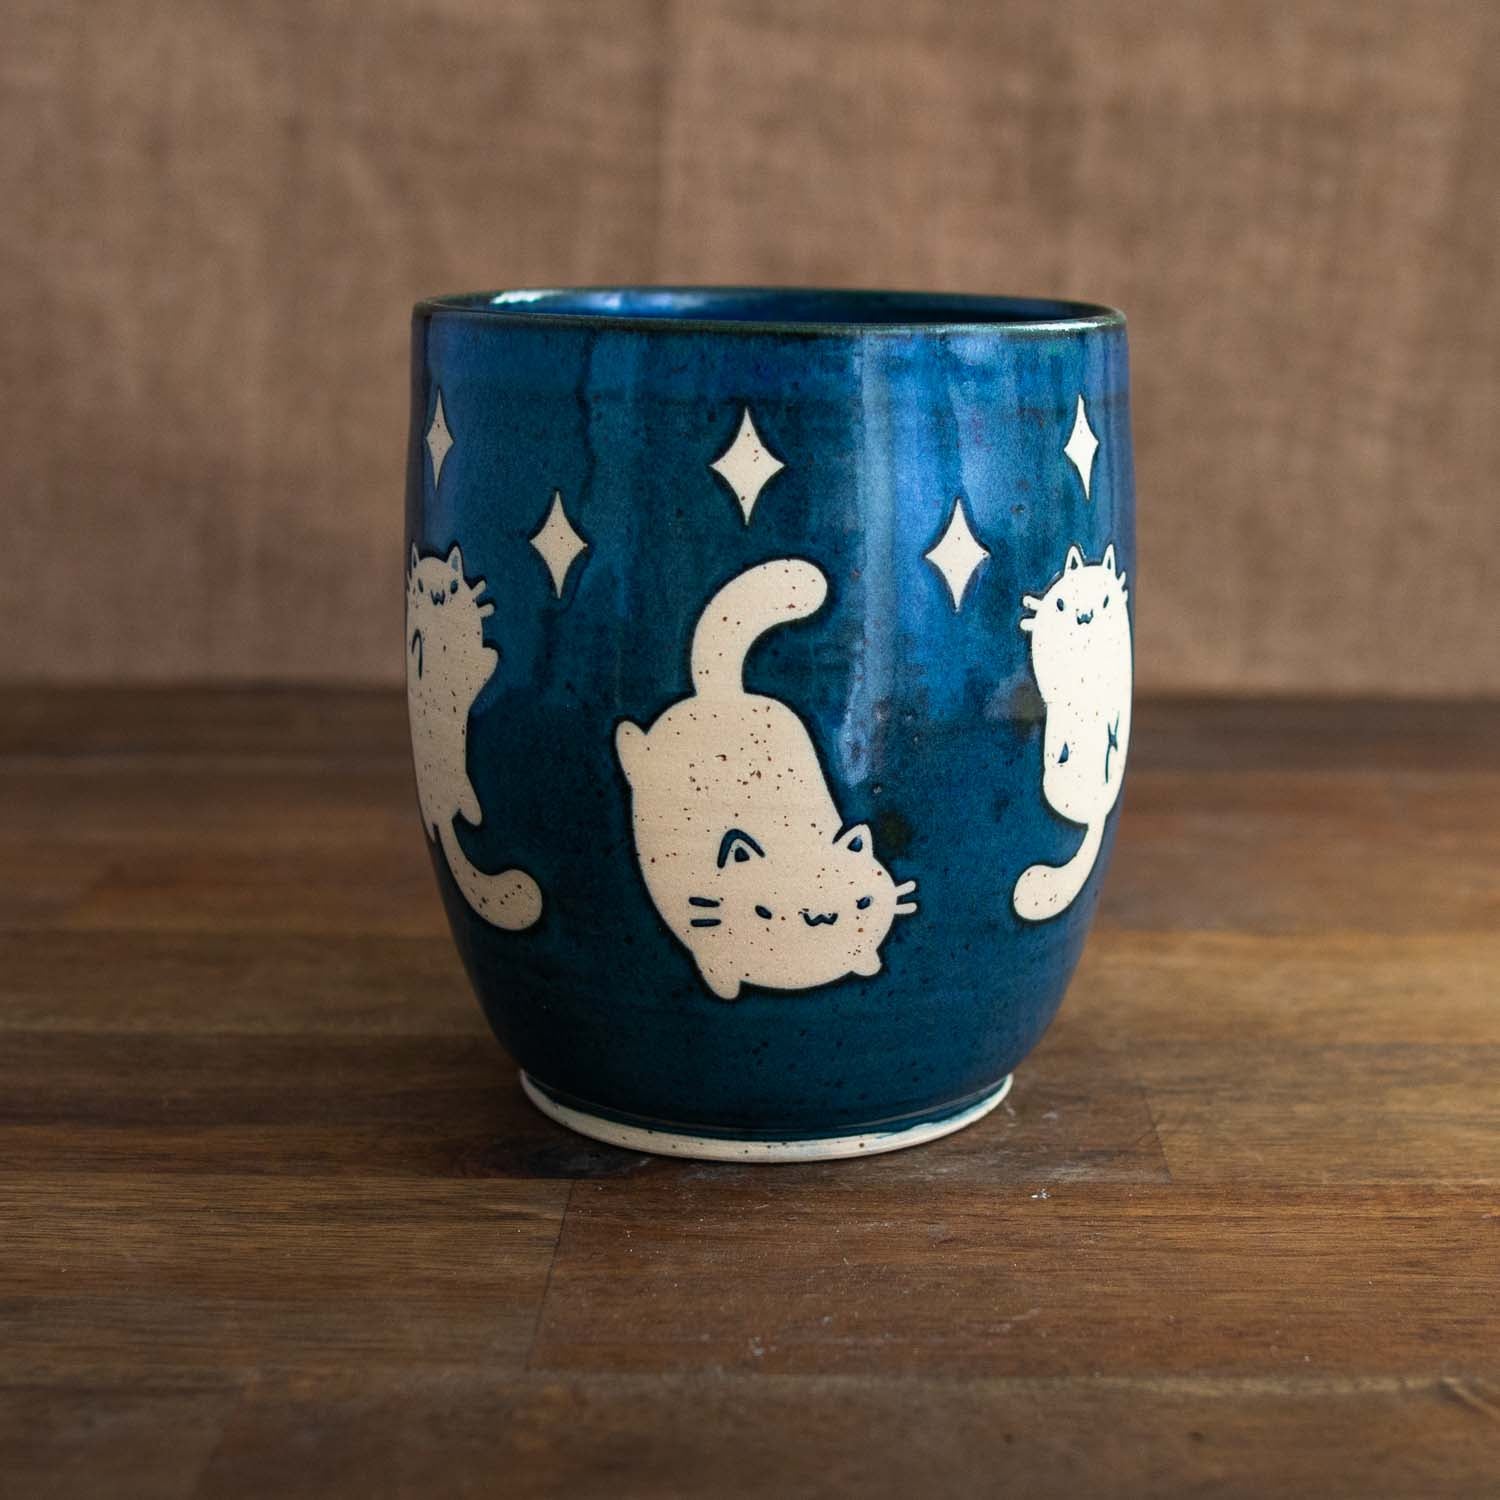 Space cats vase